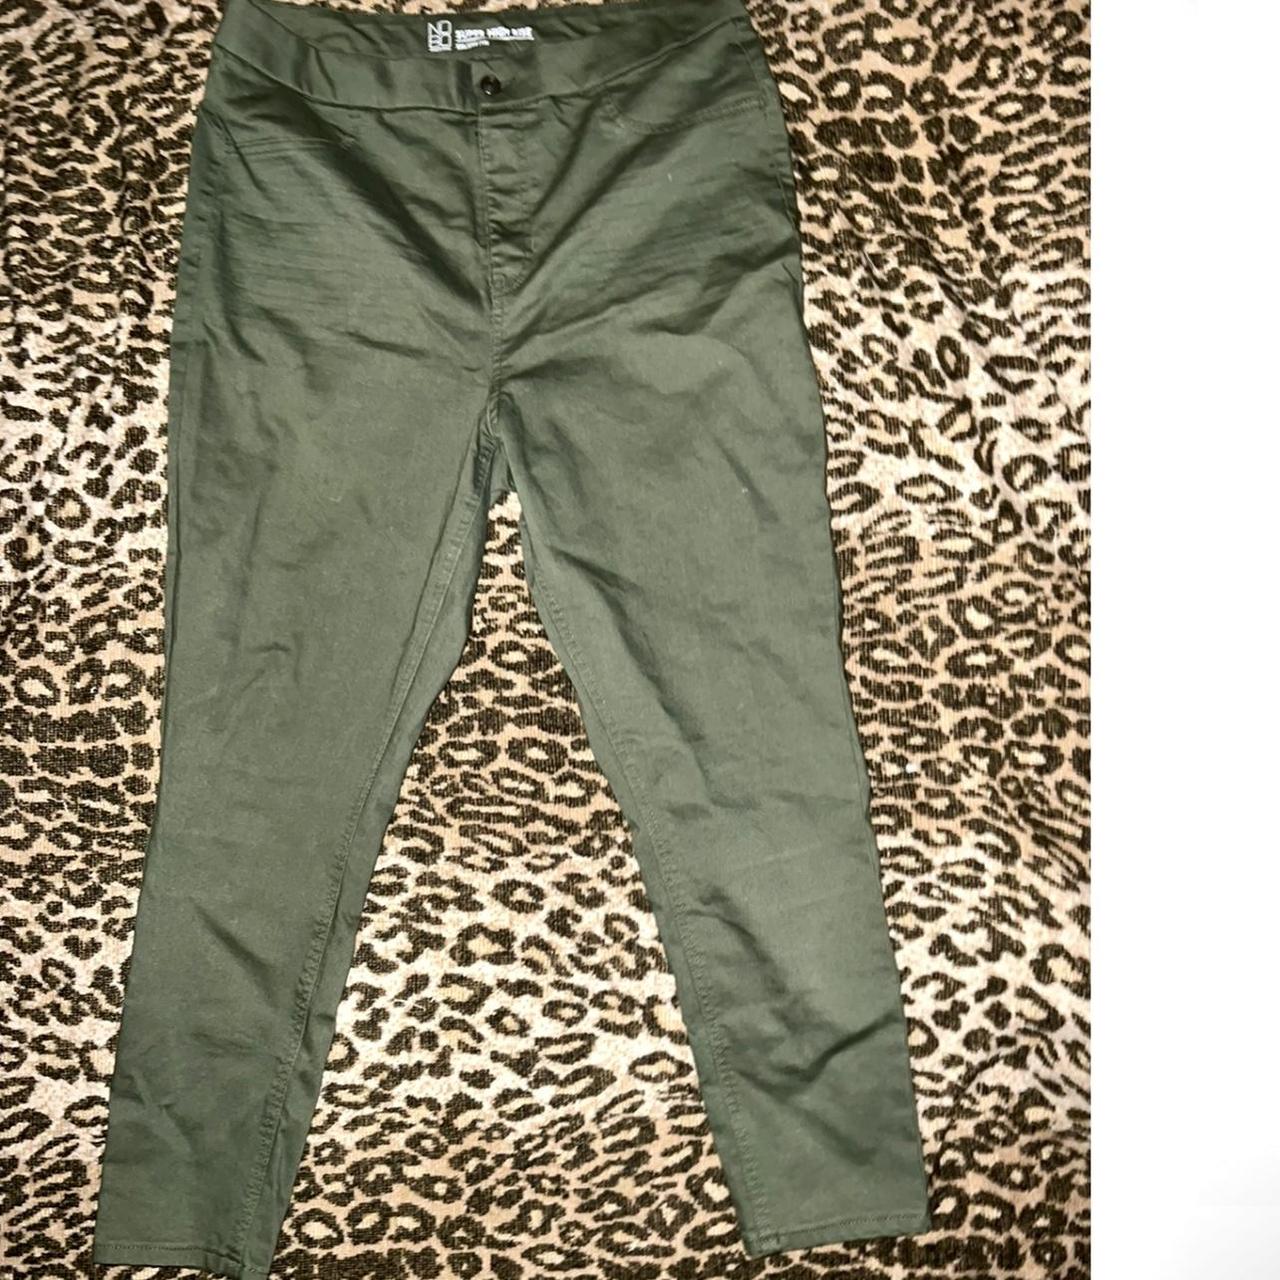 Cute No Boundaries Jeggings! These Pants are army - Depop